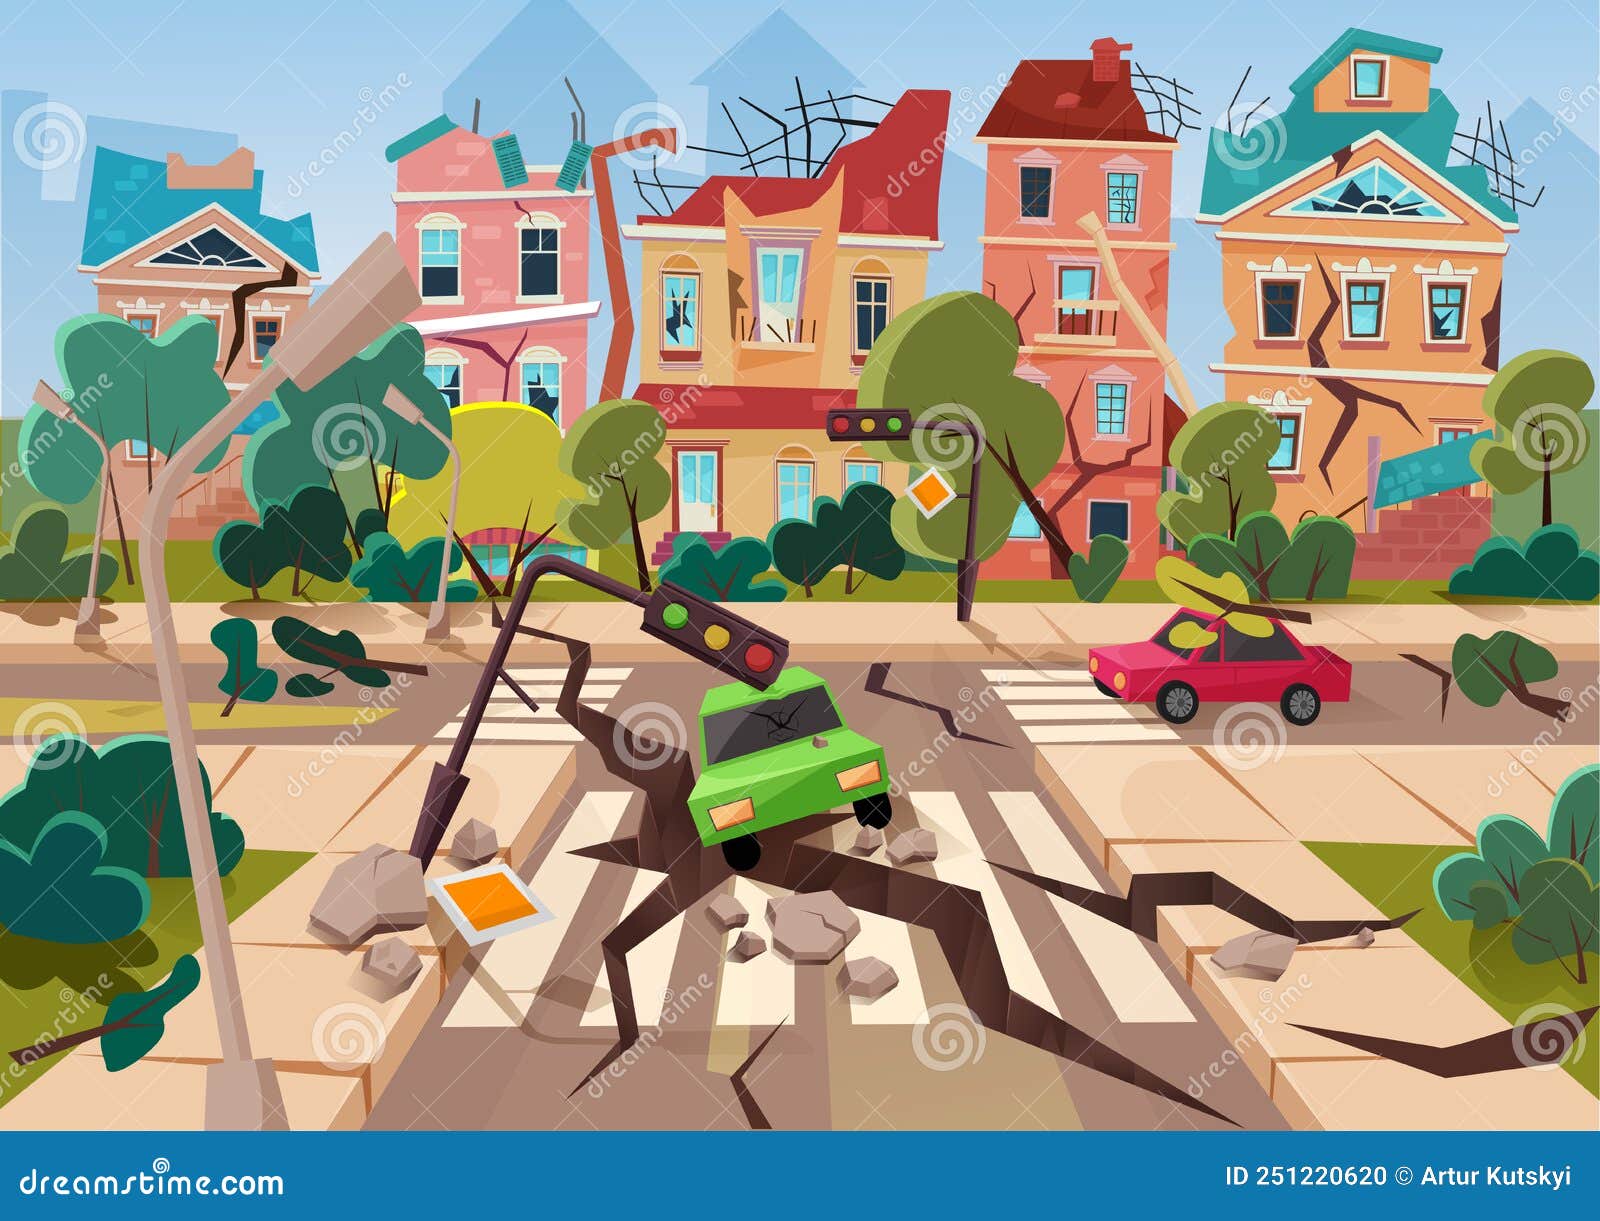 Earthquake Accident in City, Natural Disaster Destroying Buildings, Roads  and Cars Stock Vector - Illustration of abandoned, destruction: 251220620